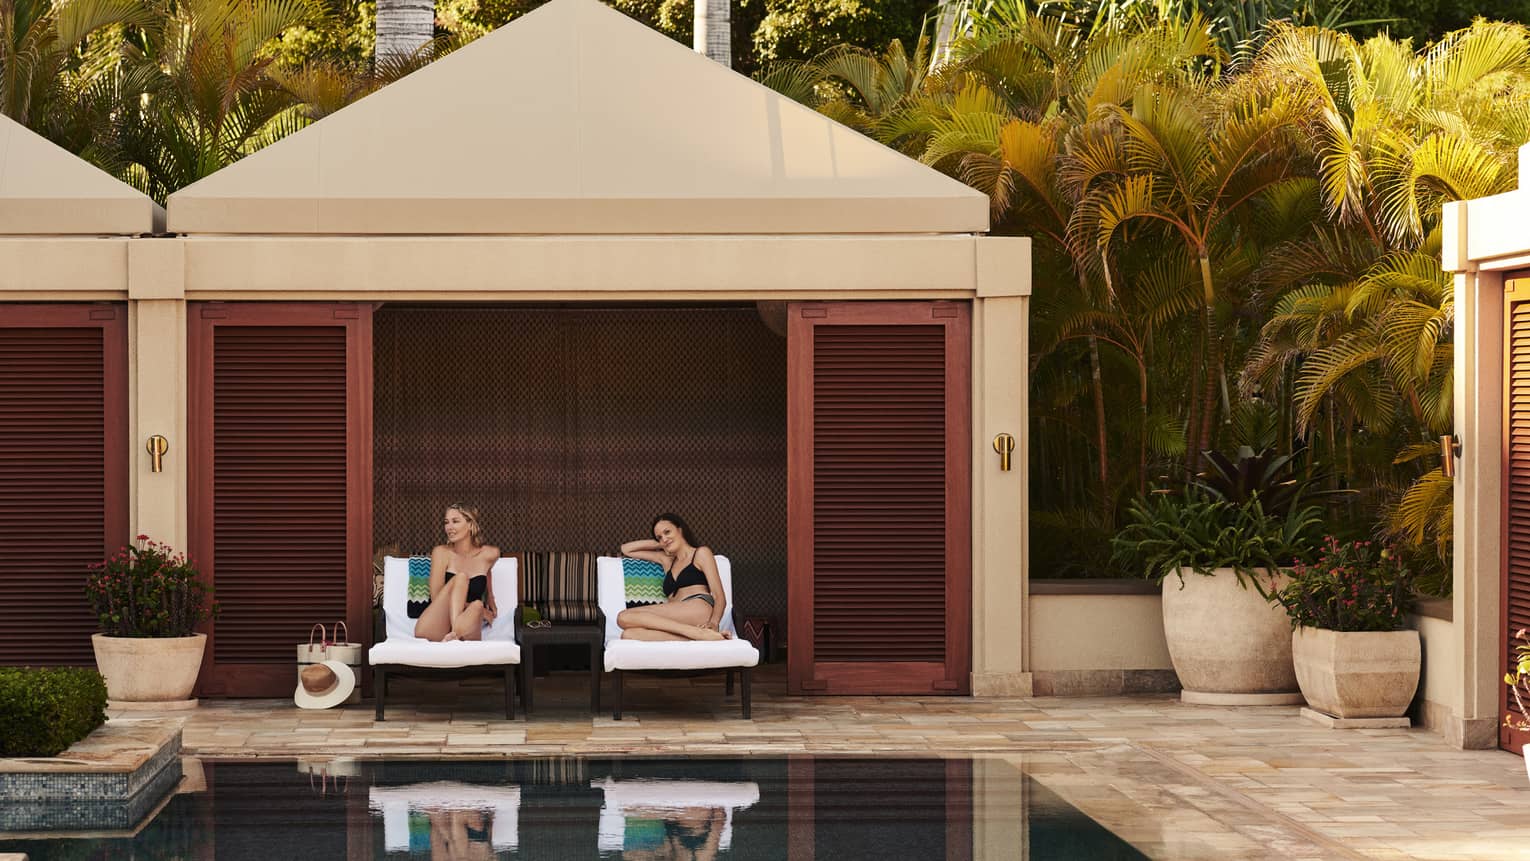 Two women on lounge chairs under poolside cabana